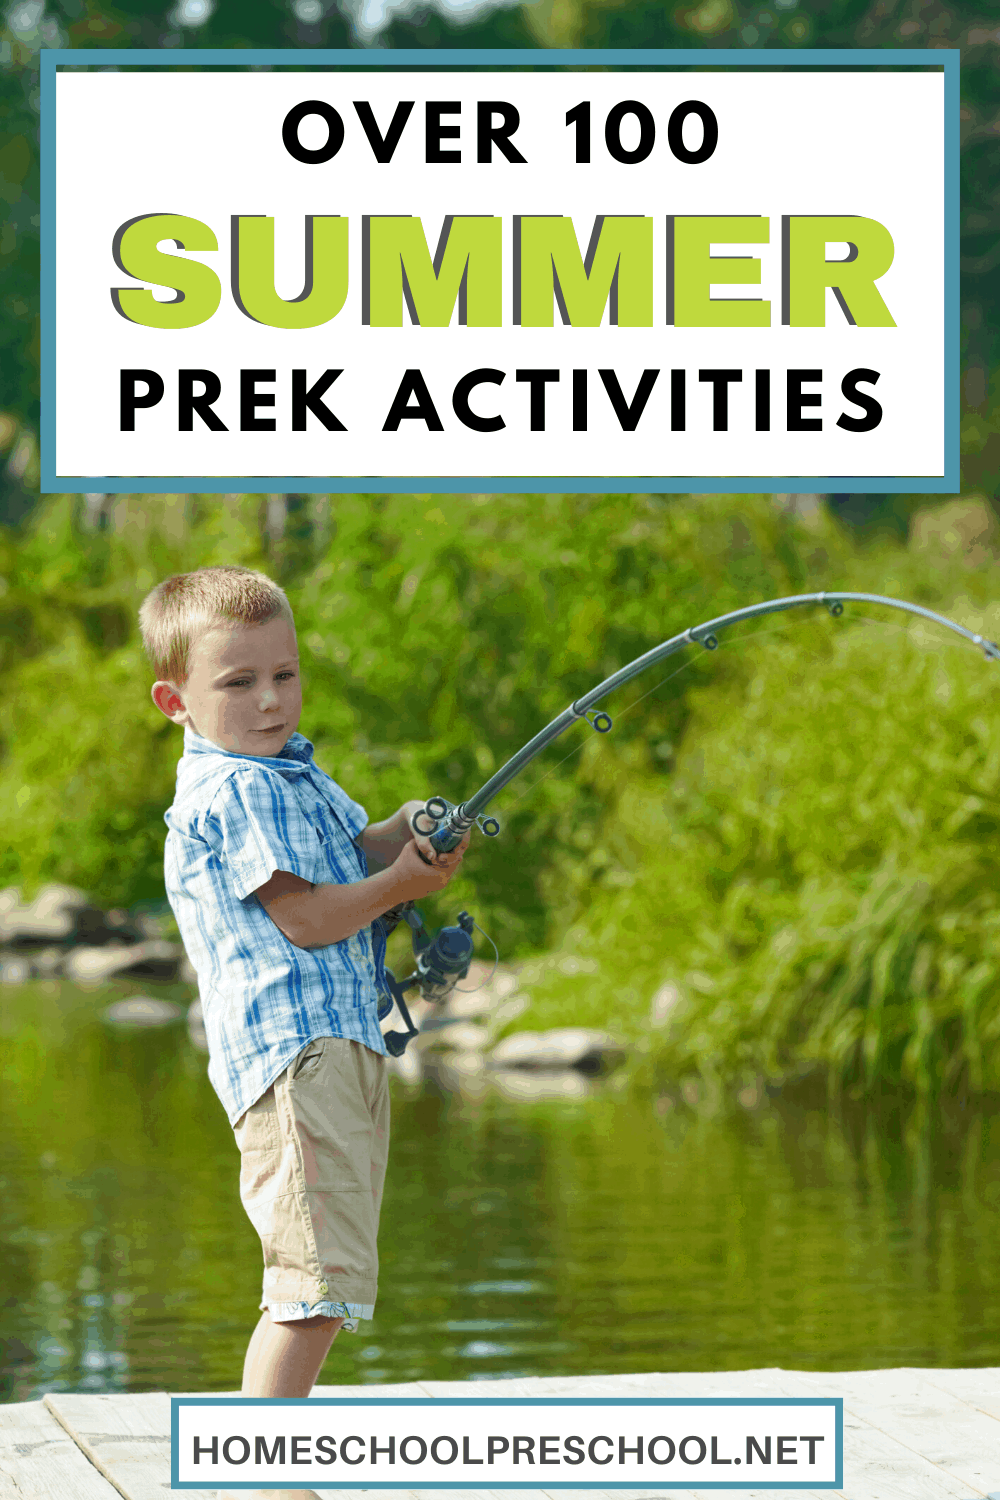 Summer is just around the corner, and you are going to love this amazing collection of summer activities for preschoolers!